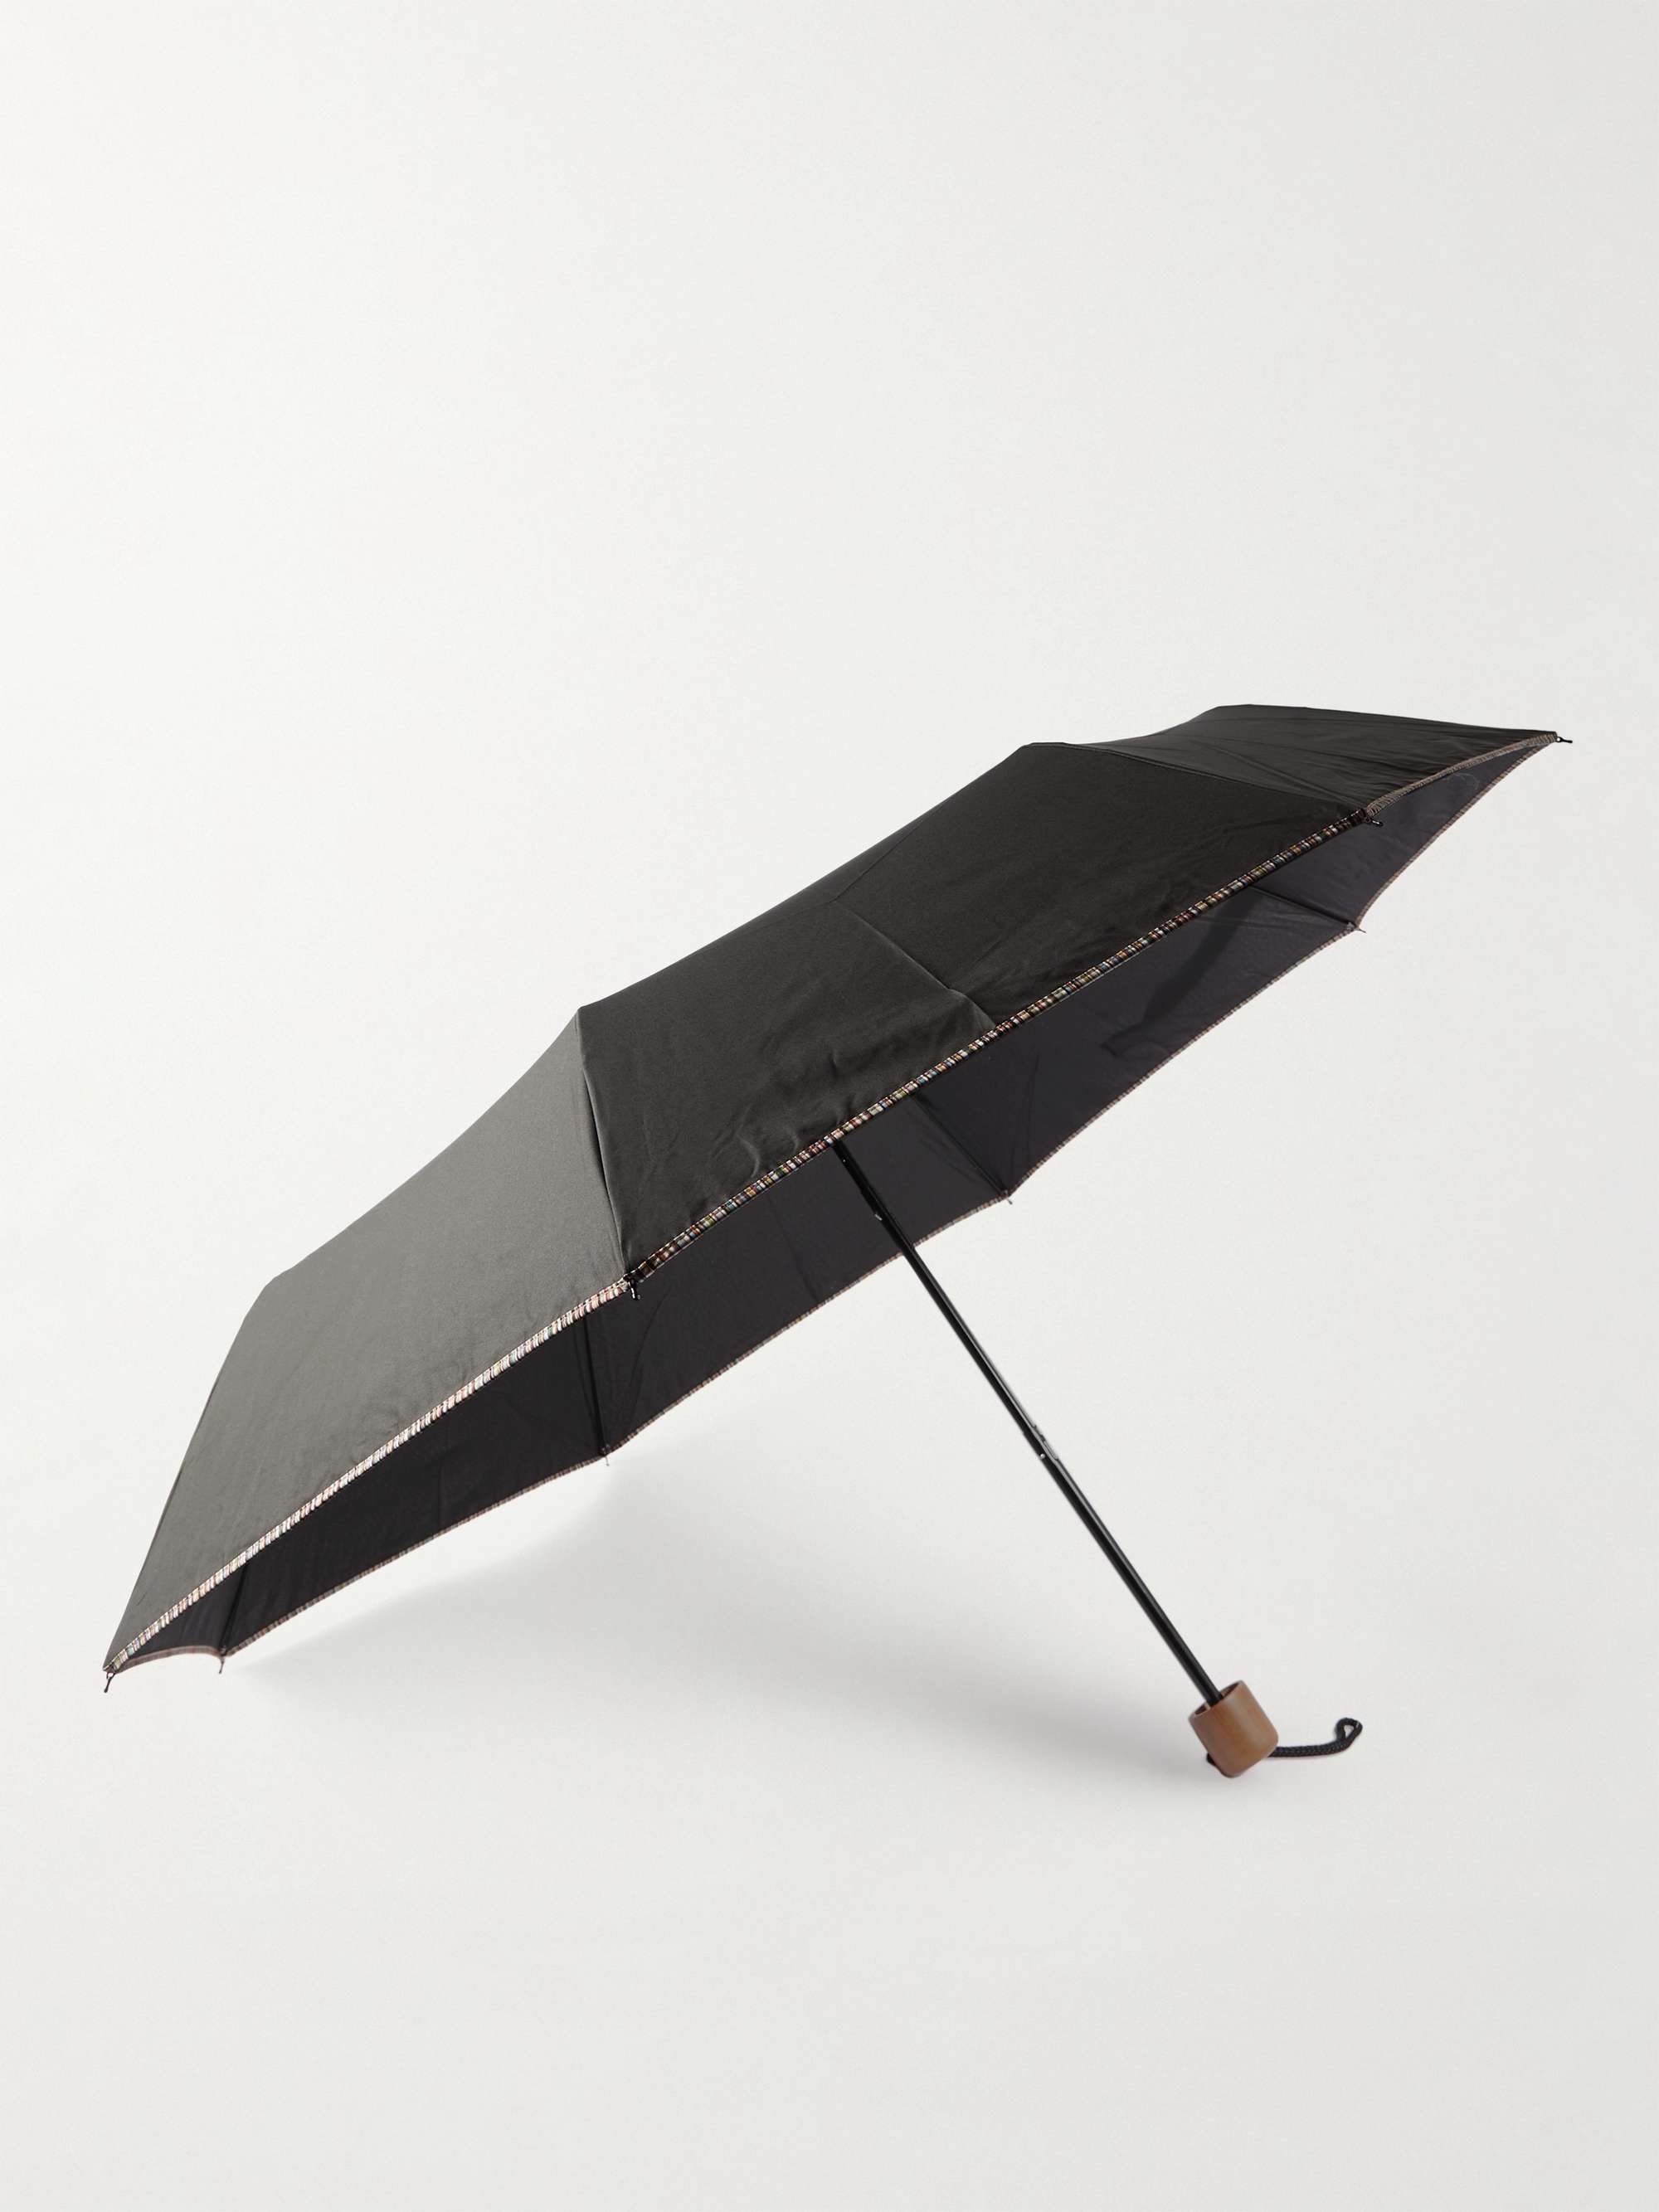 PAUL SMITH Contrast-Tipped Wood-Handle Fold-Up Umbrella | MR PORTER